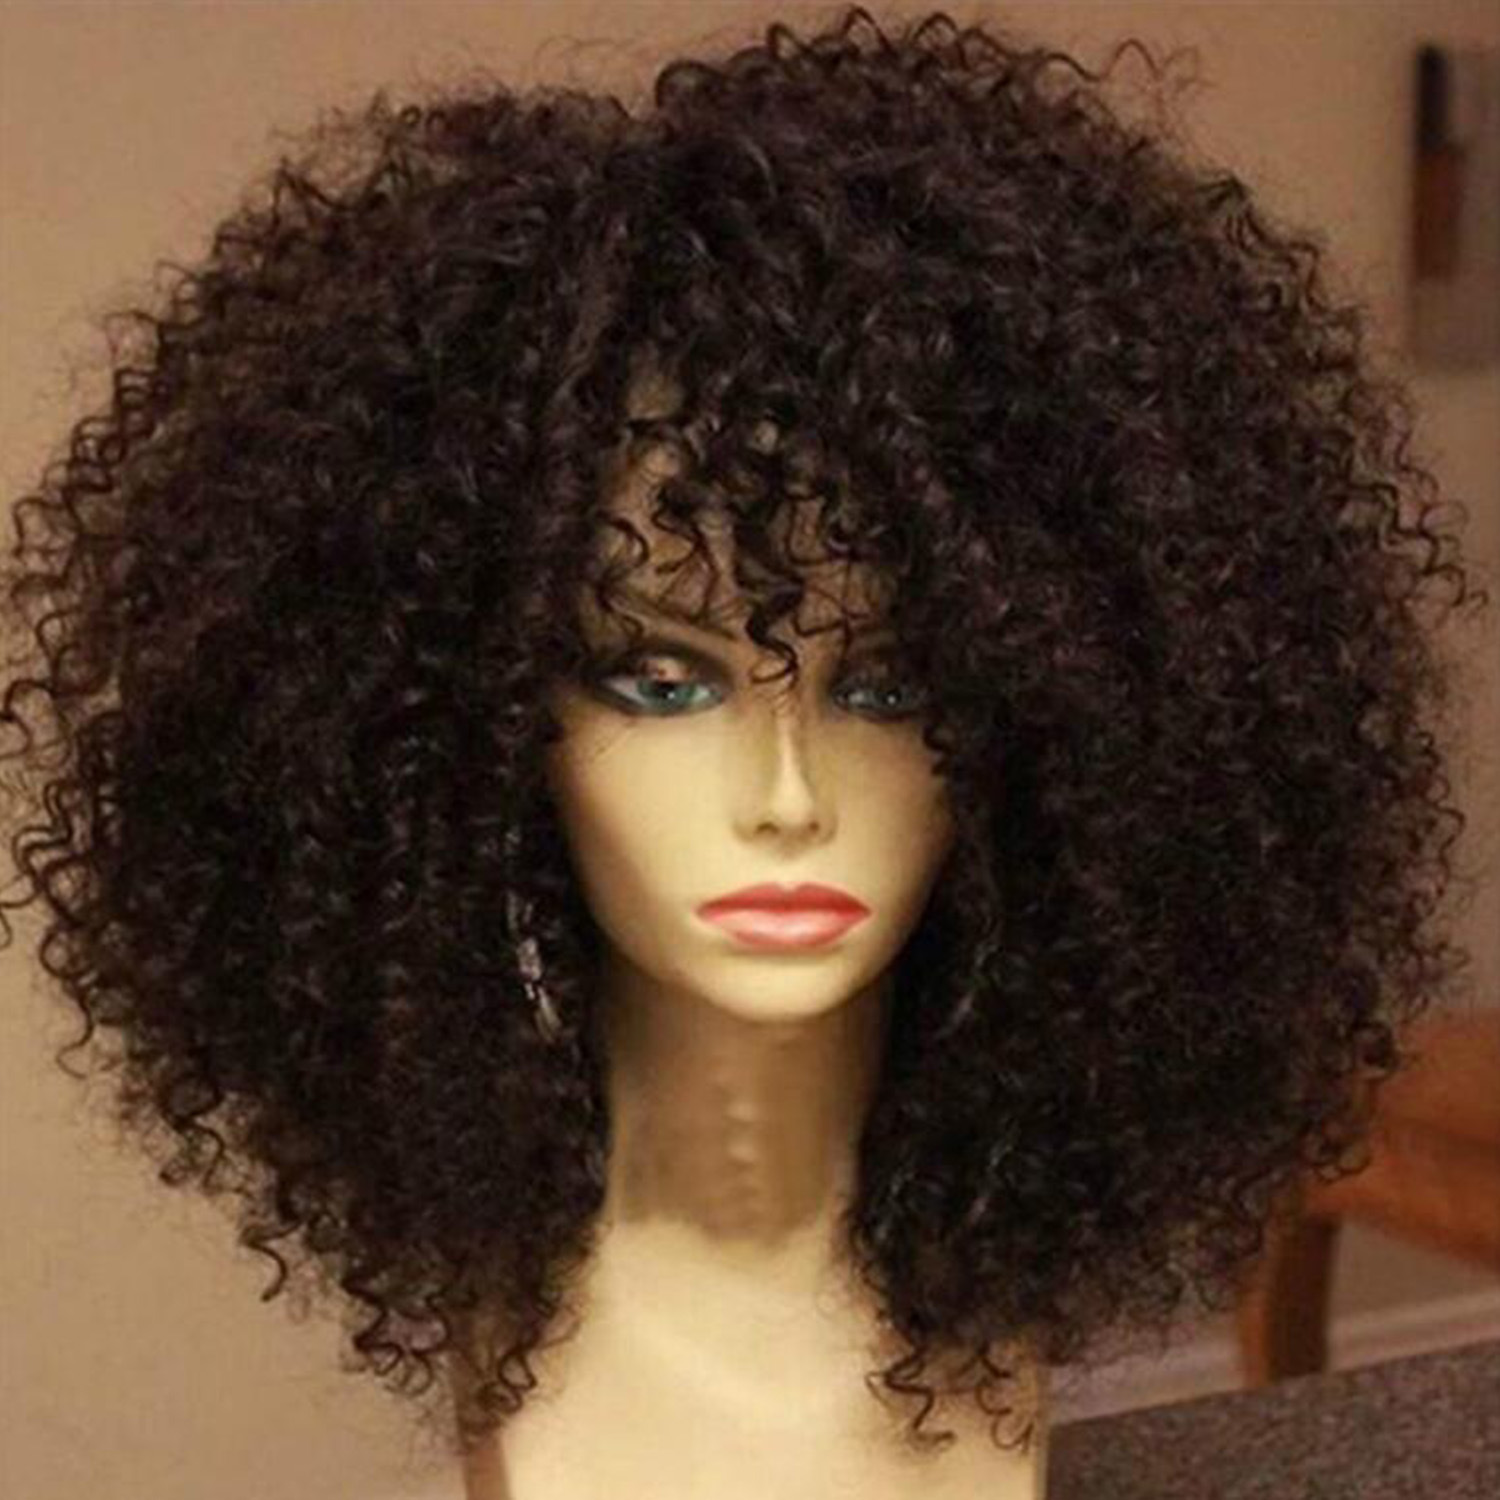 Fluffy explosive head wig in afro style with small curly hair, part of a fashionable black synthetic wig